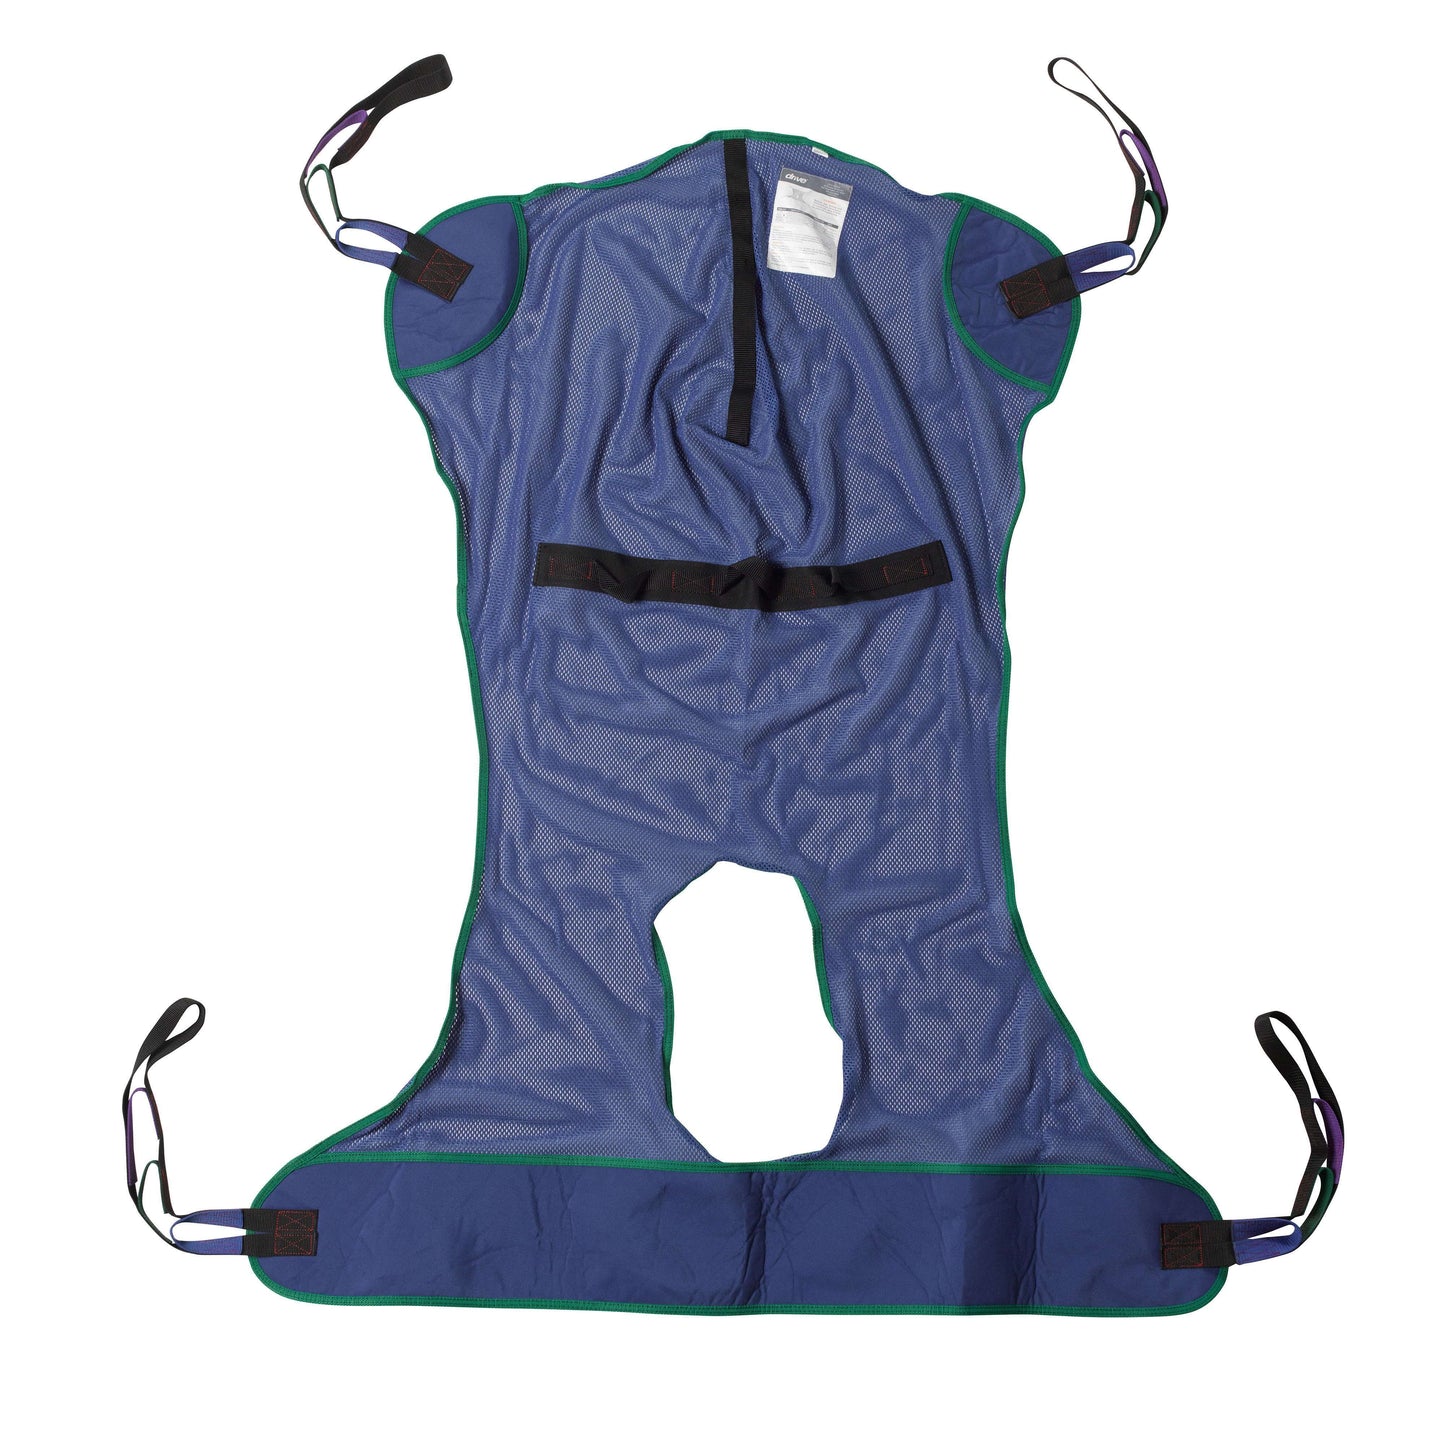 Drive 13221l Full Body Patient Lift Sling, Mesh with Commode Cutout, Large